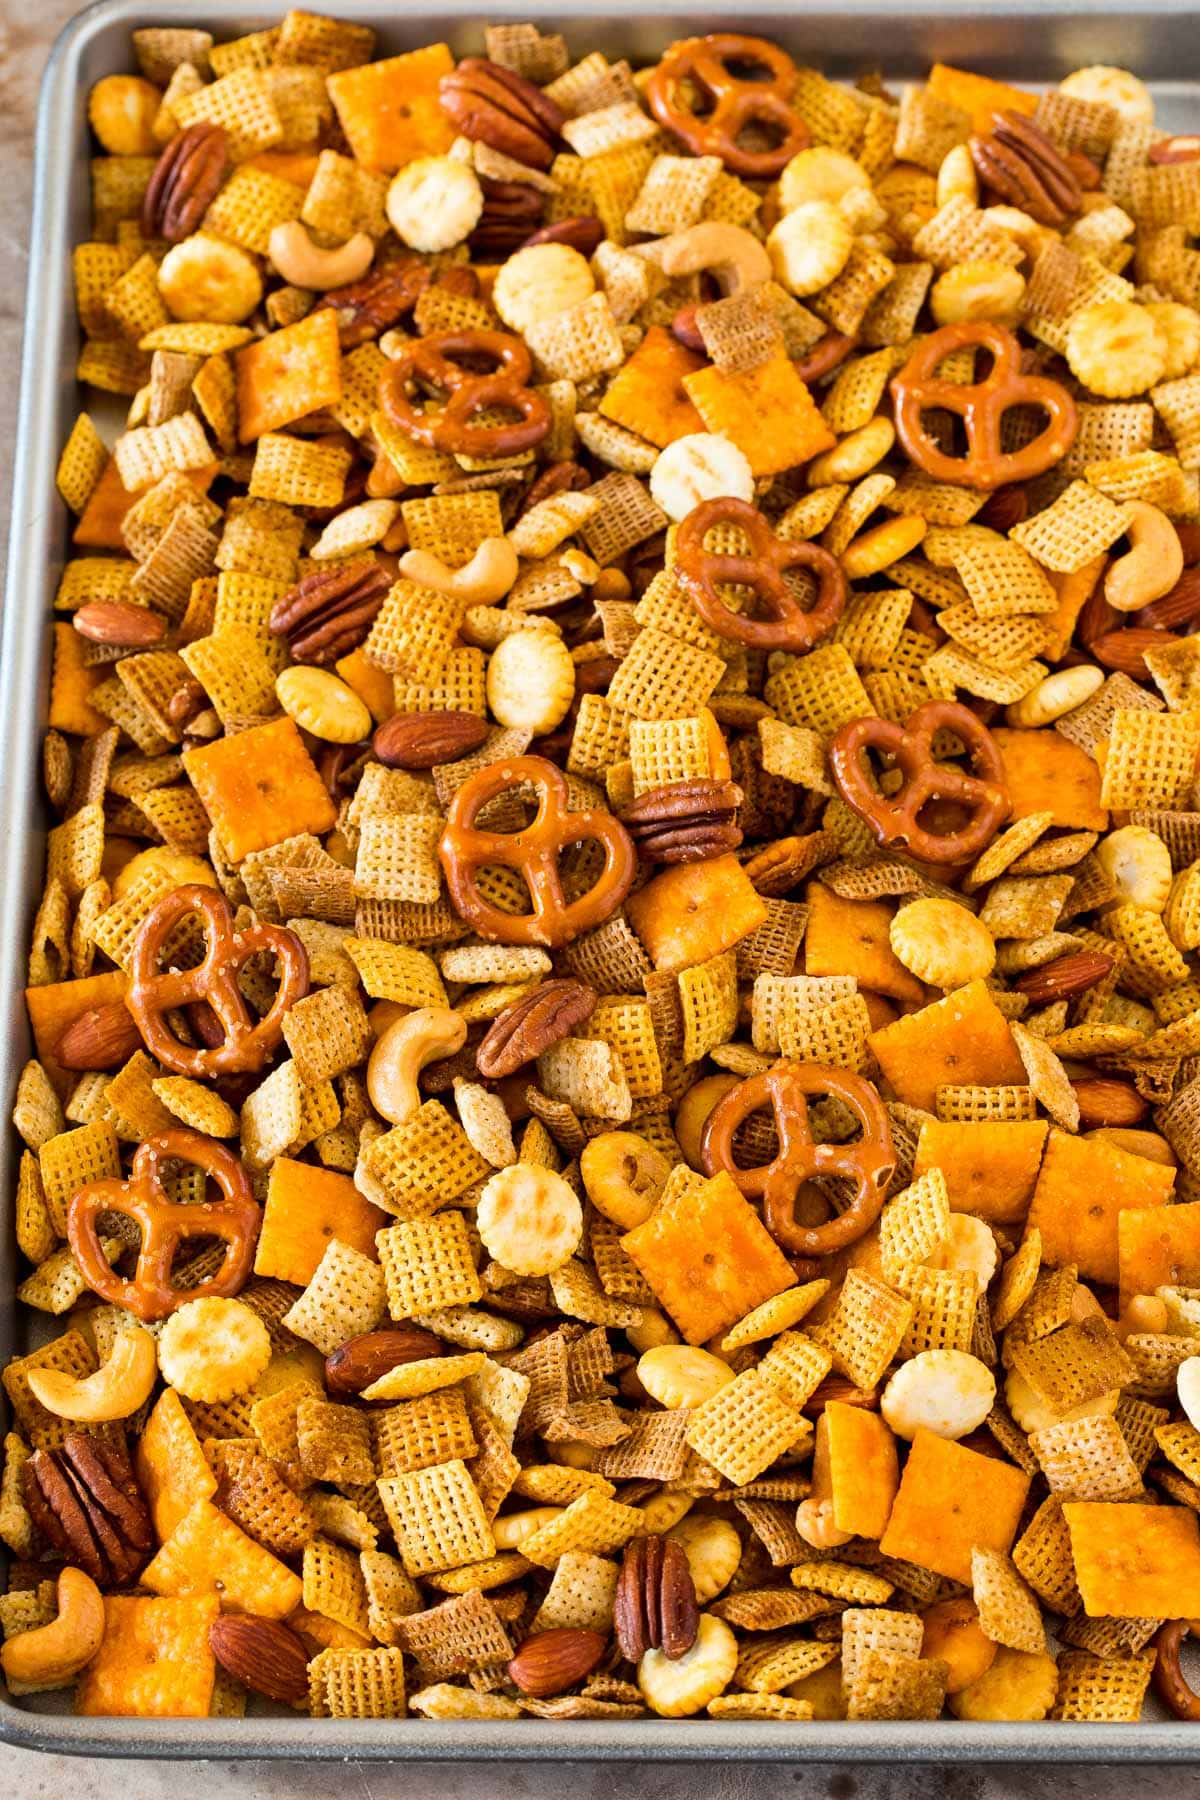 A sheet pan of Chex mix made with cereal, crackers, pretzels and nuts.